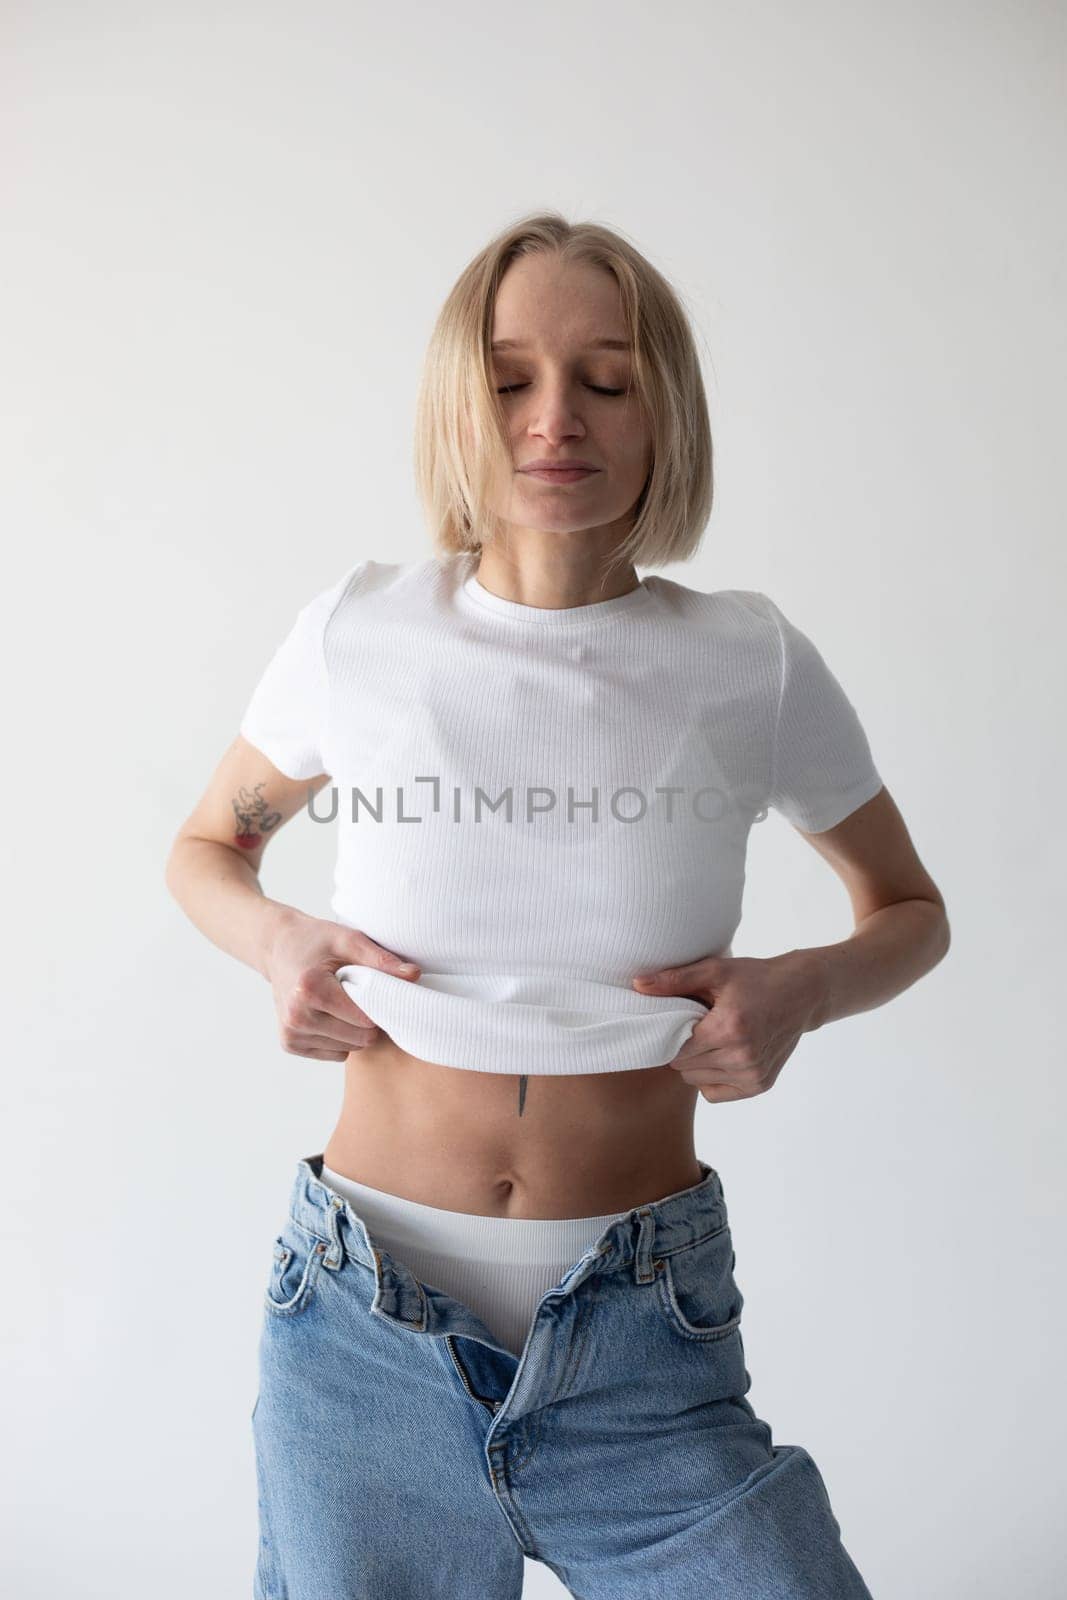 Beautiful blonde girl in a white T-shirt and blue jeans and sneakers posing on a white background. High quality photo